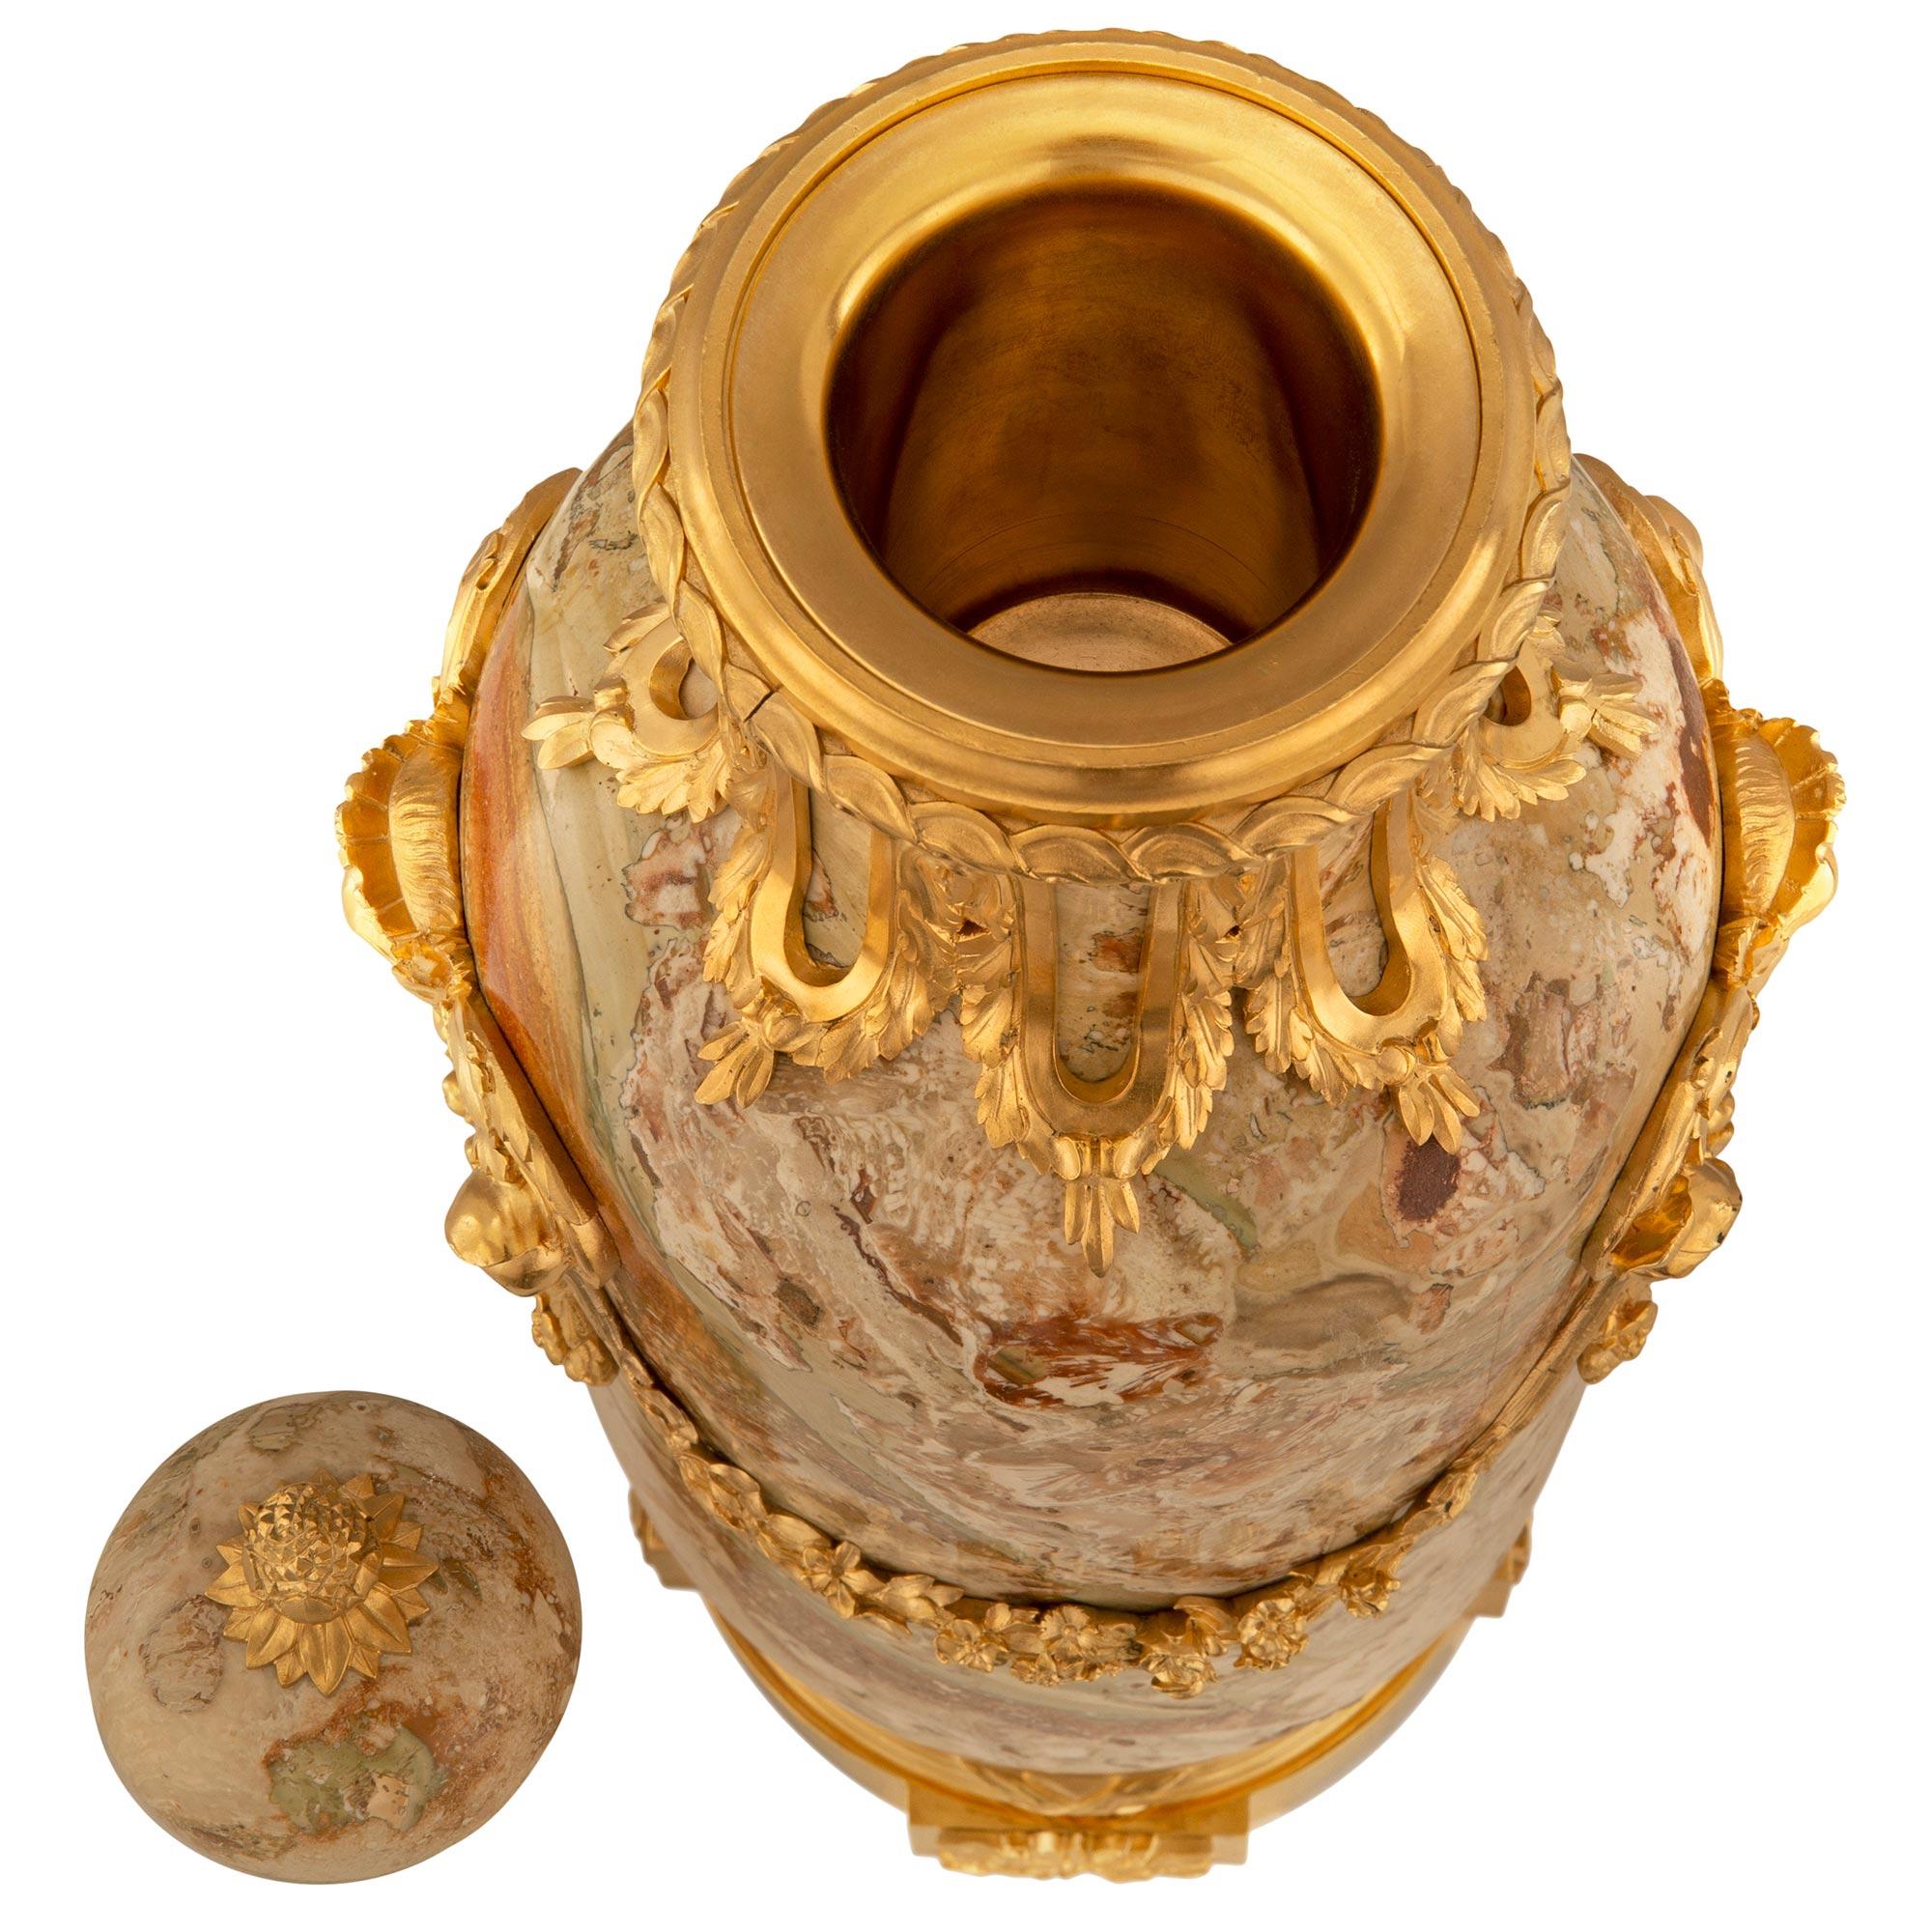 A stunning and very high quality pair of French 19th century Louis XVI st. Belle Époque period ormolu and Sarrancolin marble lidded urns. Each urn is raised by an elegant circular ormolu base with block feet adorned with striking rosettes below a